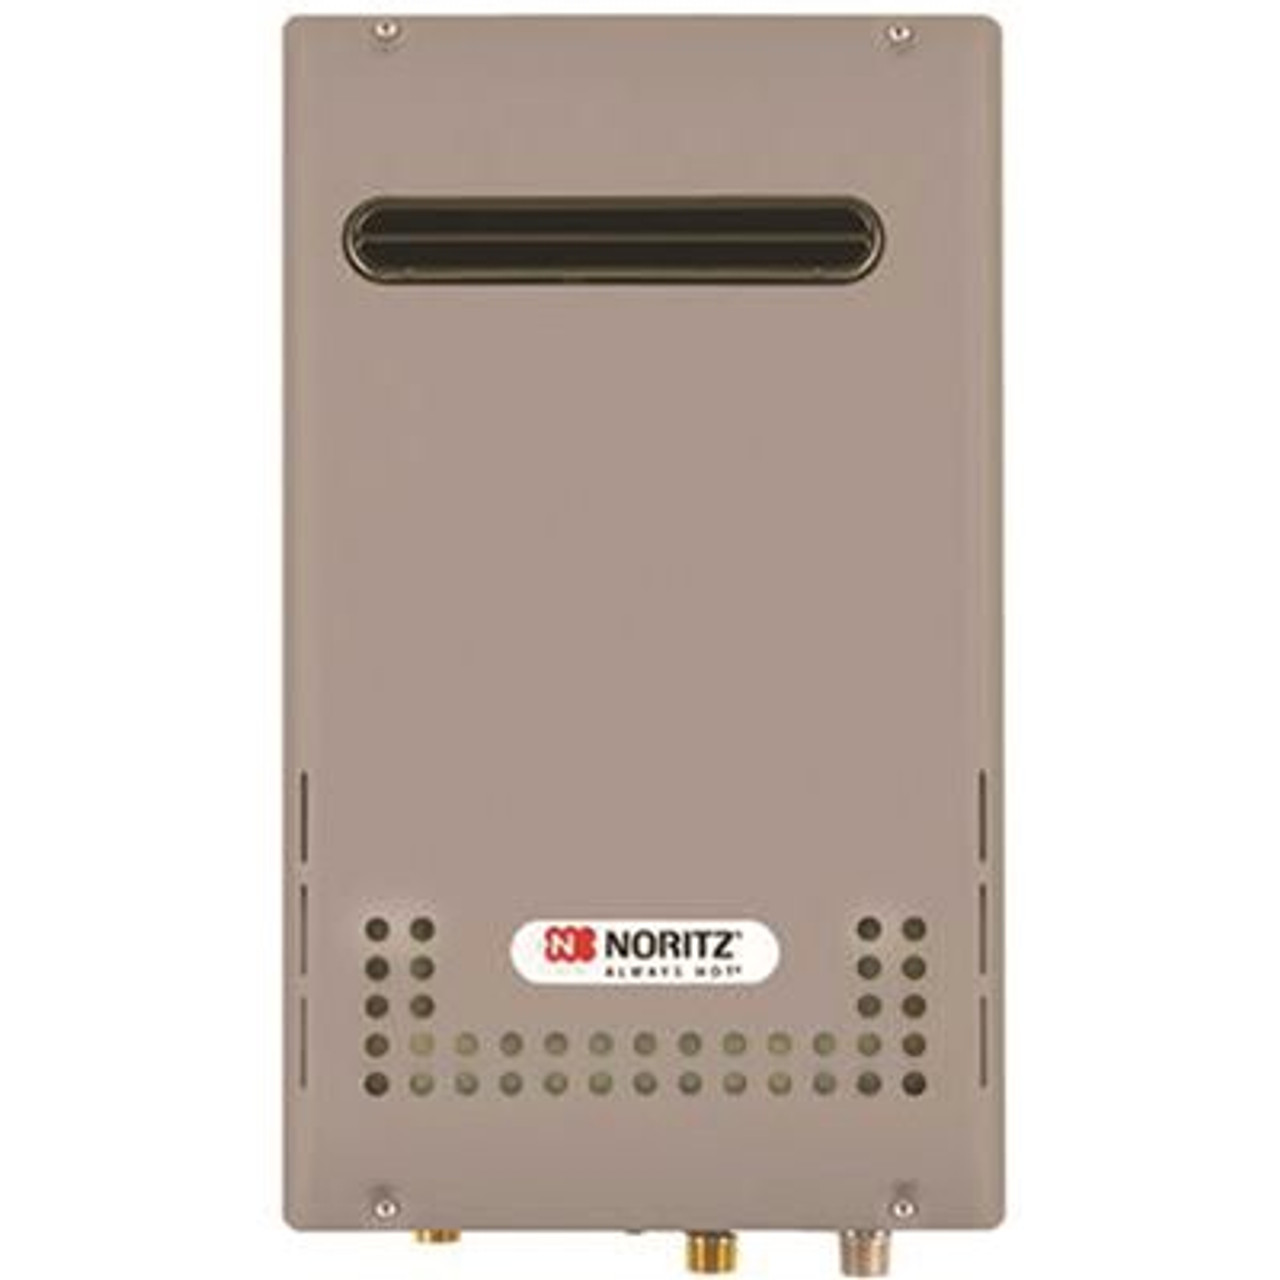 NORITZ 9.8 GPM 199,900 BTU Commercial Natural Gas Tankless Water Heater Mid-Efficiency Outdoor